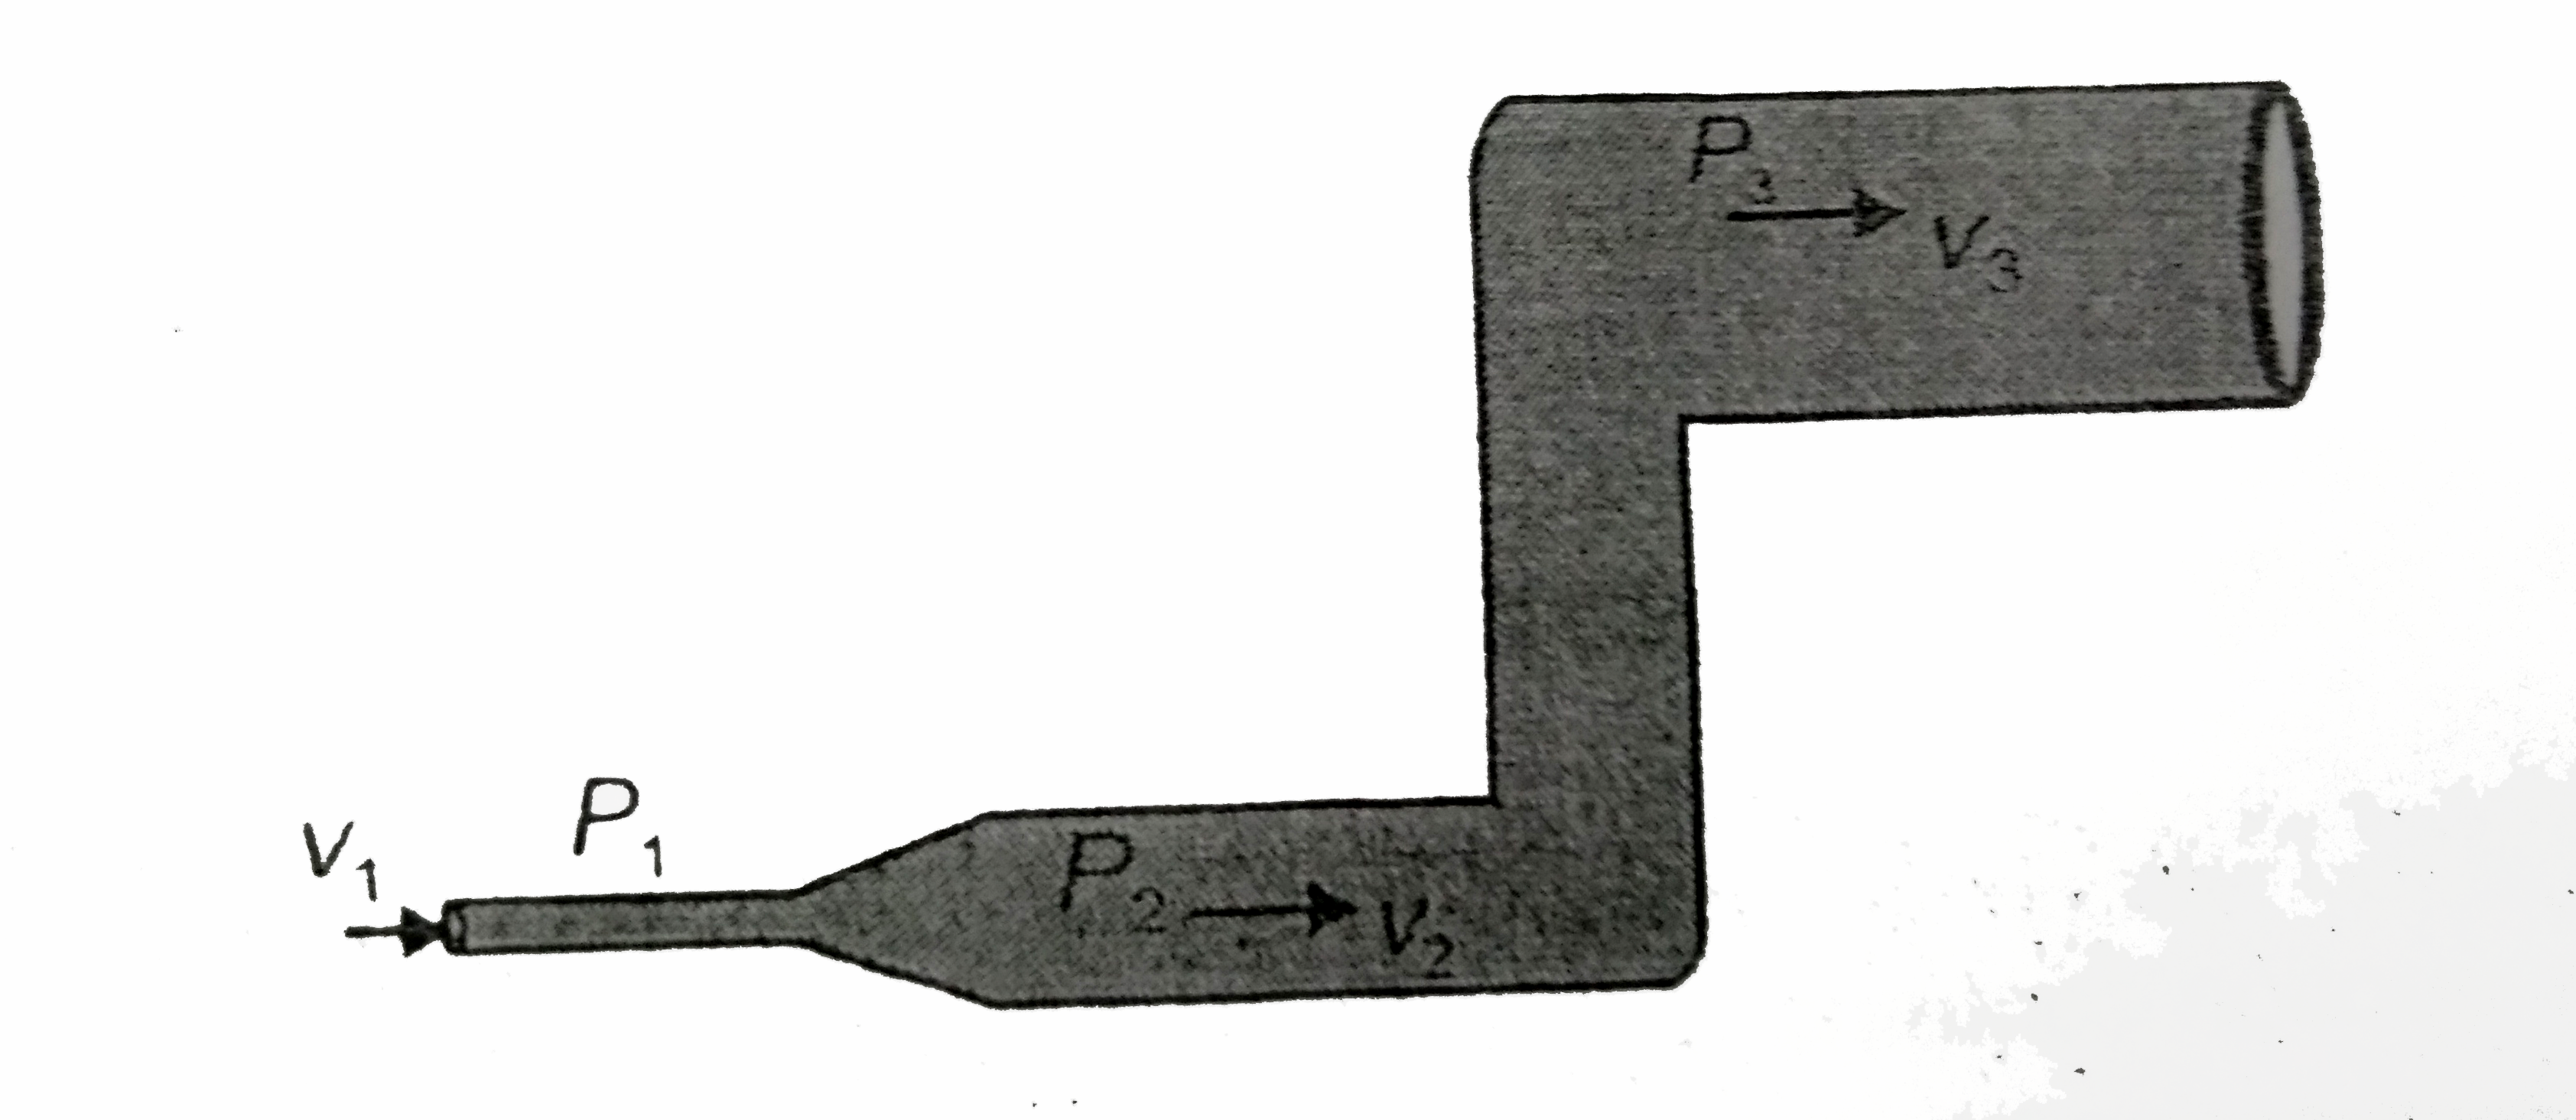 Water is flowing through a pipe as shown in figure. If P(1), P(2) and P(3) are pressures and v(1), v(2) and v(3) are velocities of water at the different sections as shown in figure, then